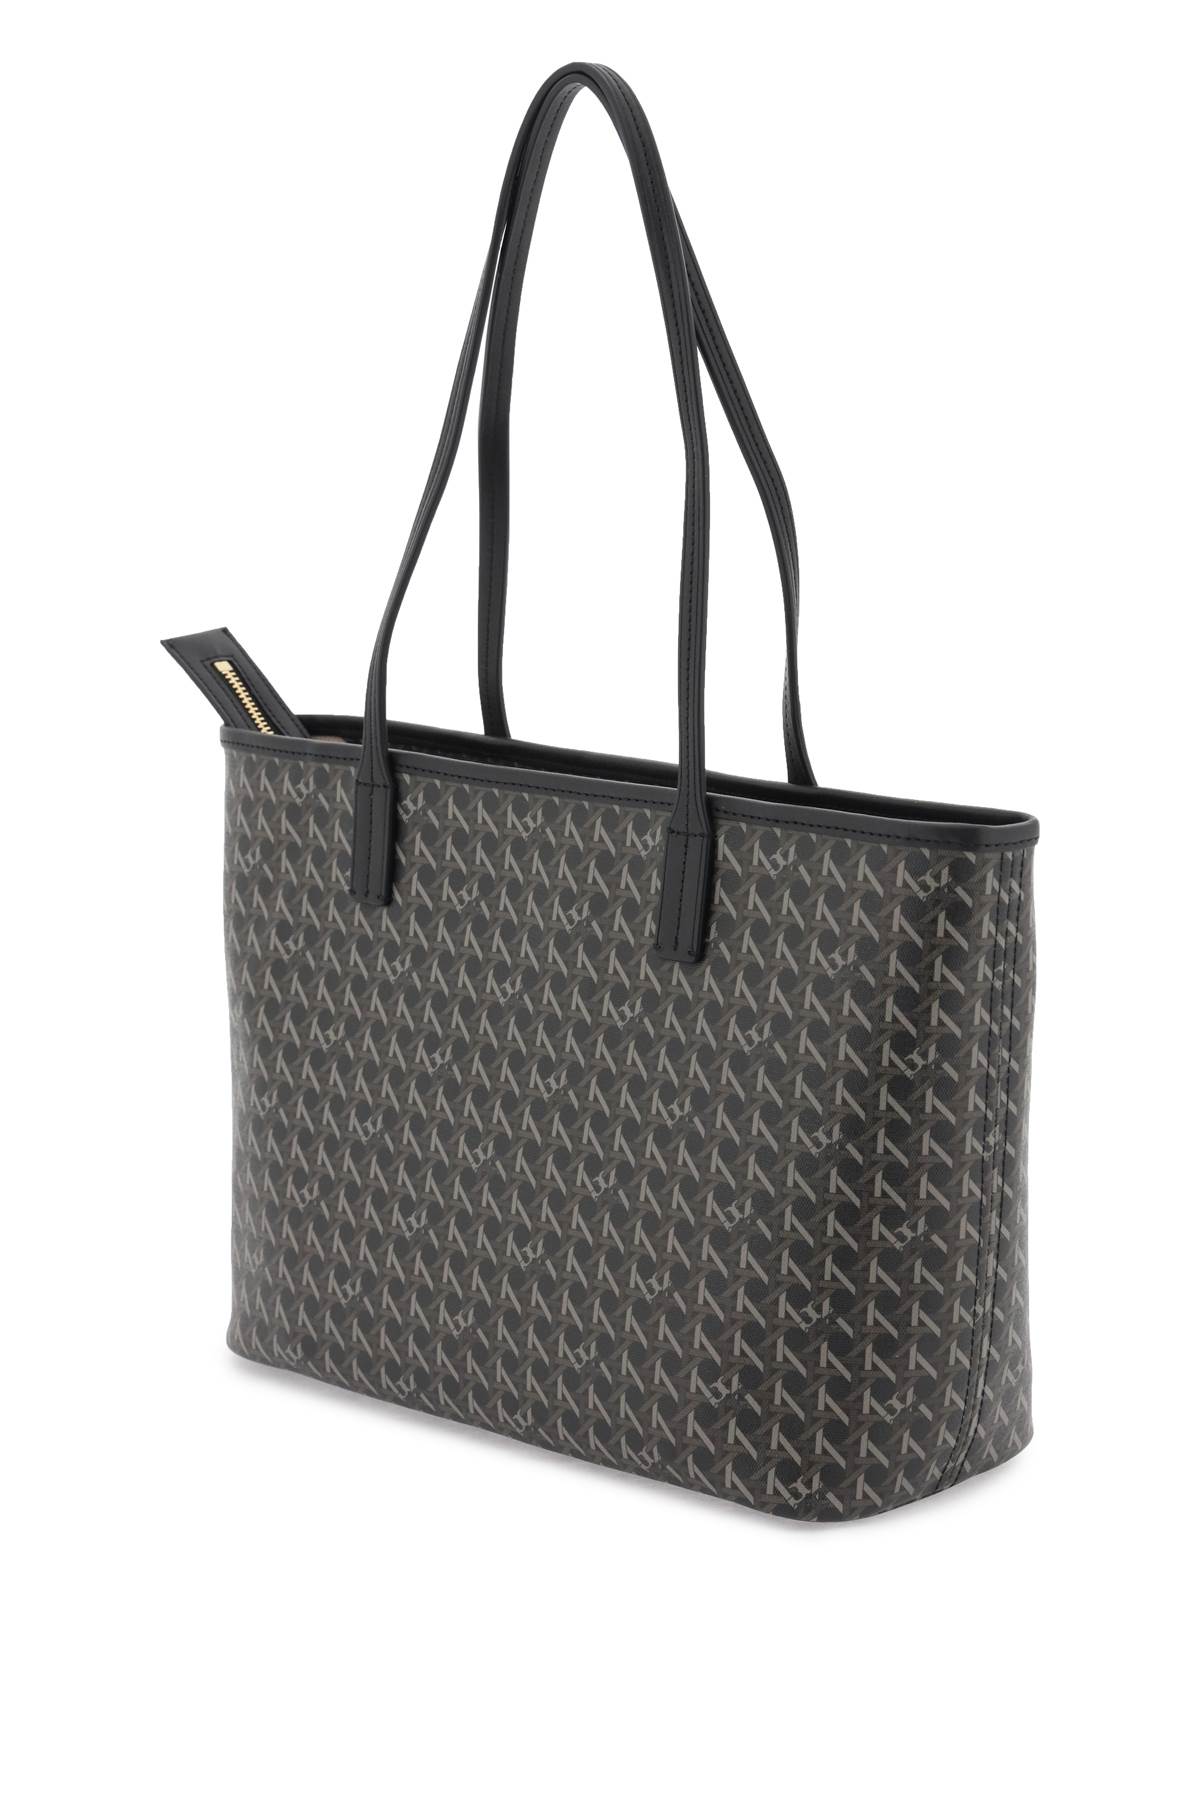 Shop Tory Burch Ever-ready Small Tote Bag In Black